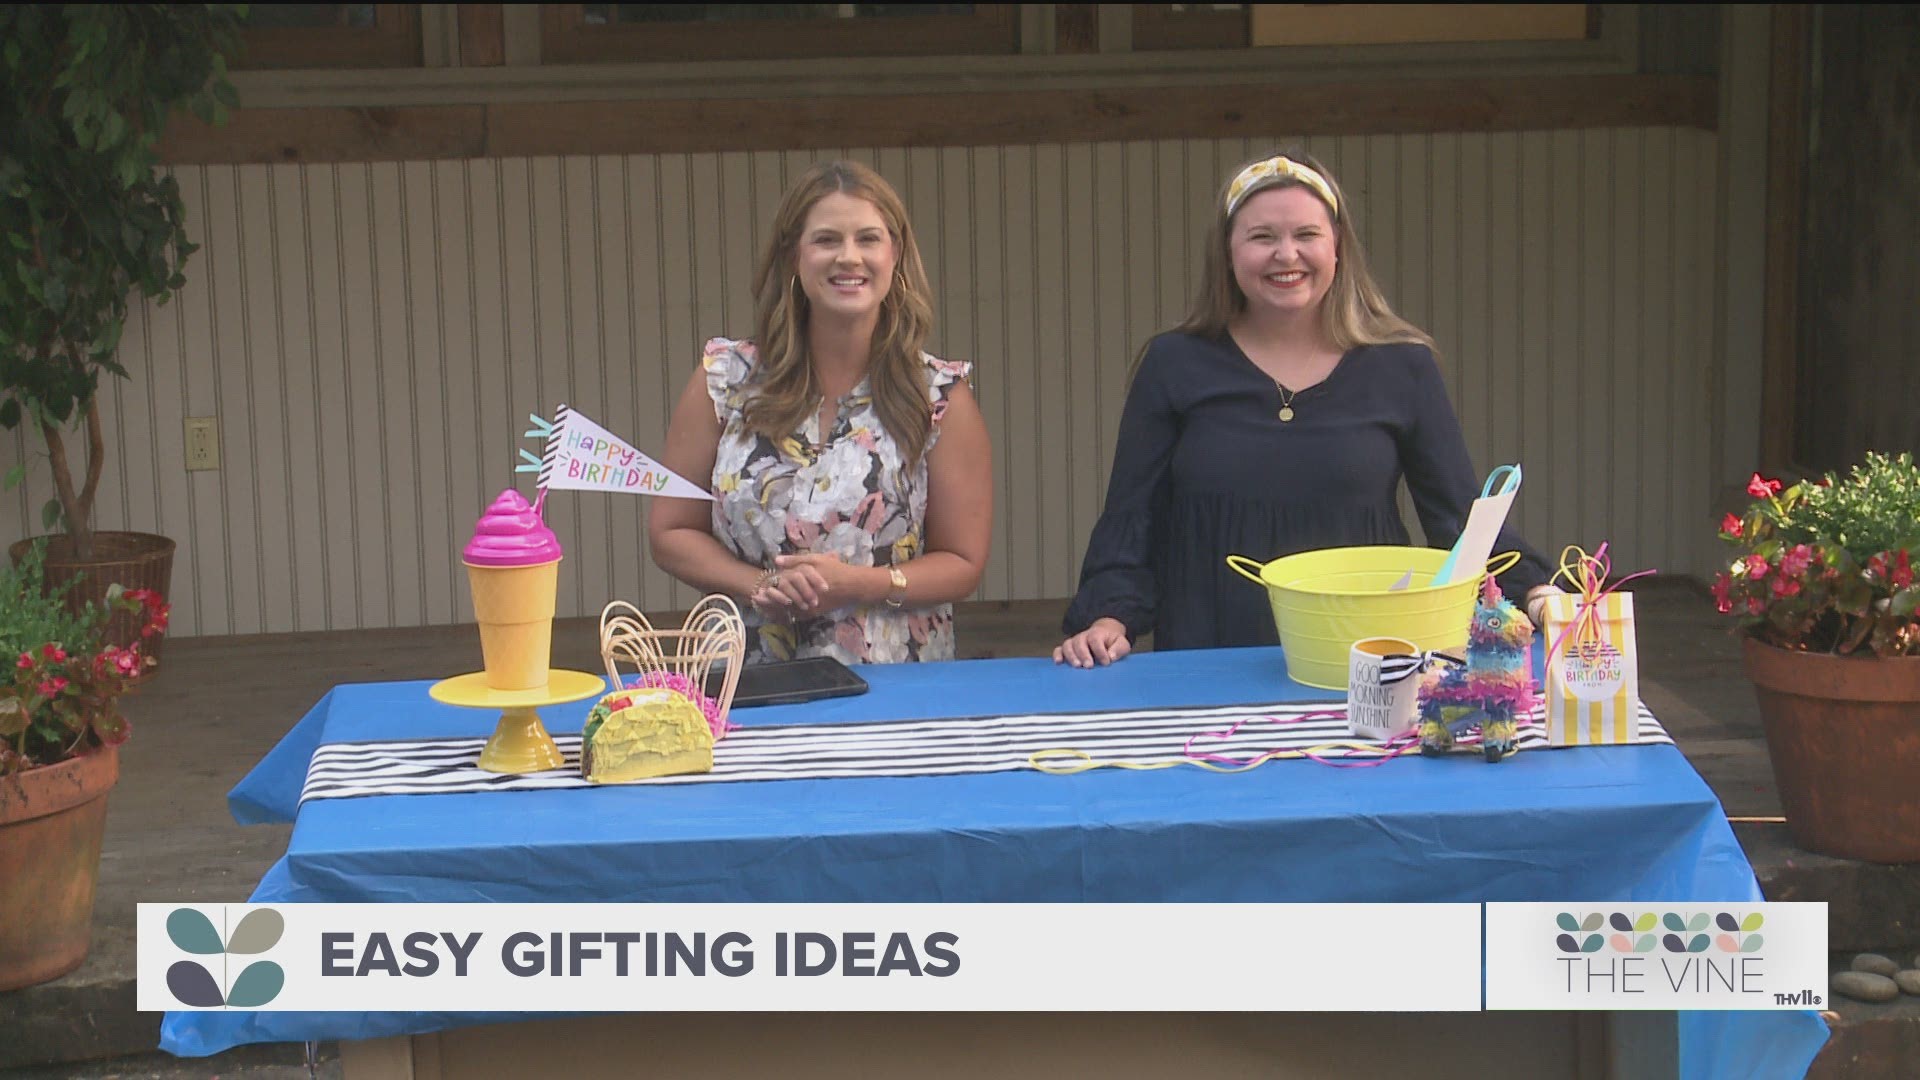 From birthdays to weddings, there is always something to celebrate! Krista Ryken with K to Z Design shows us how to make our gifts stand out from the crowd.